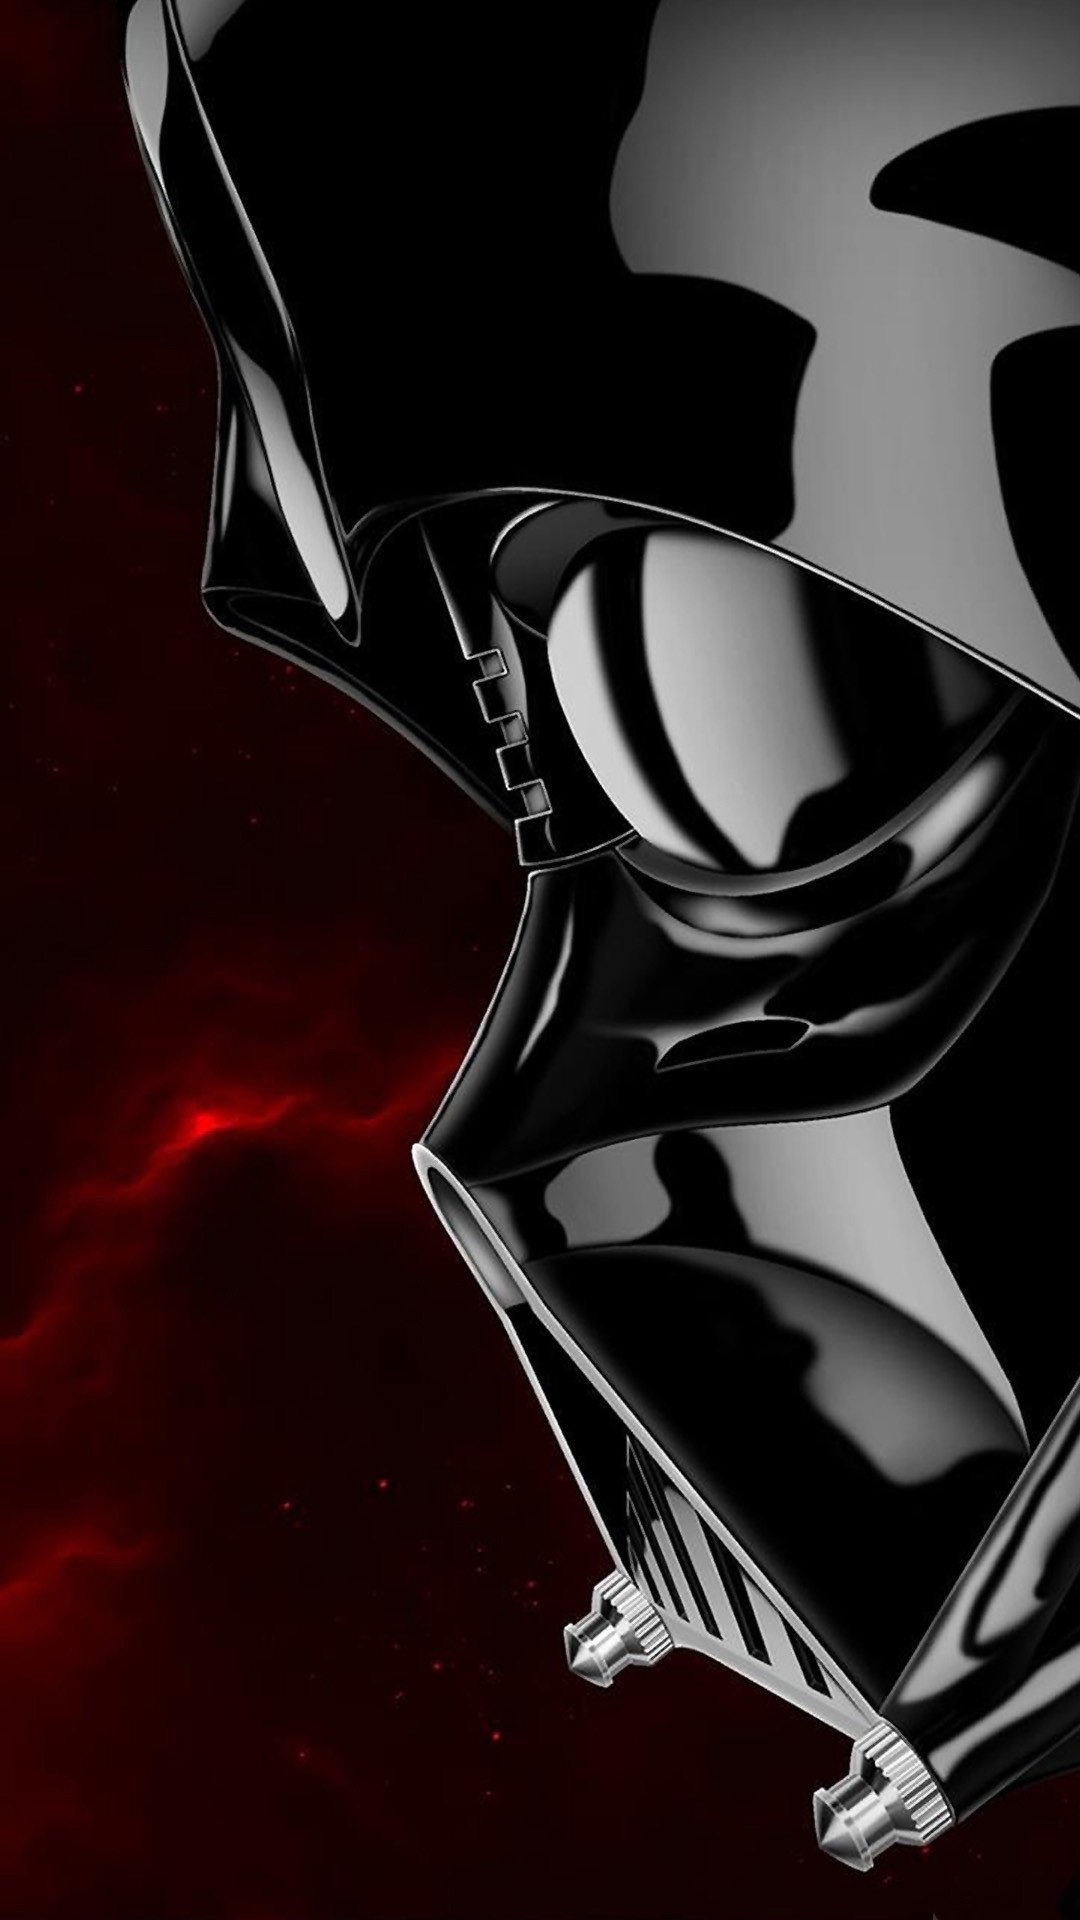 Star Wars Wallpaper For Android 69 Images